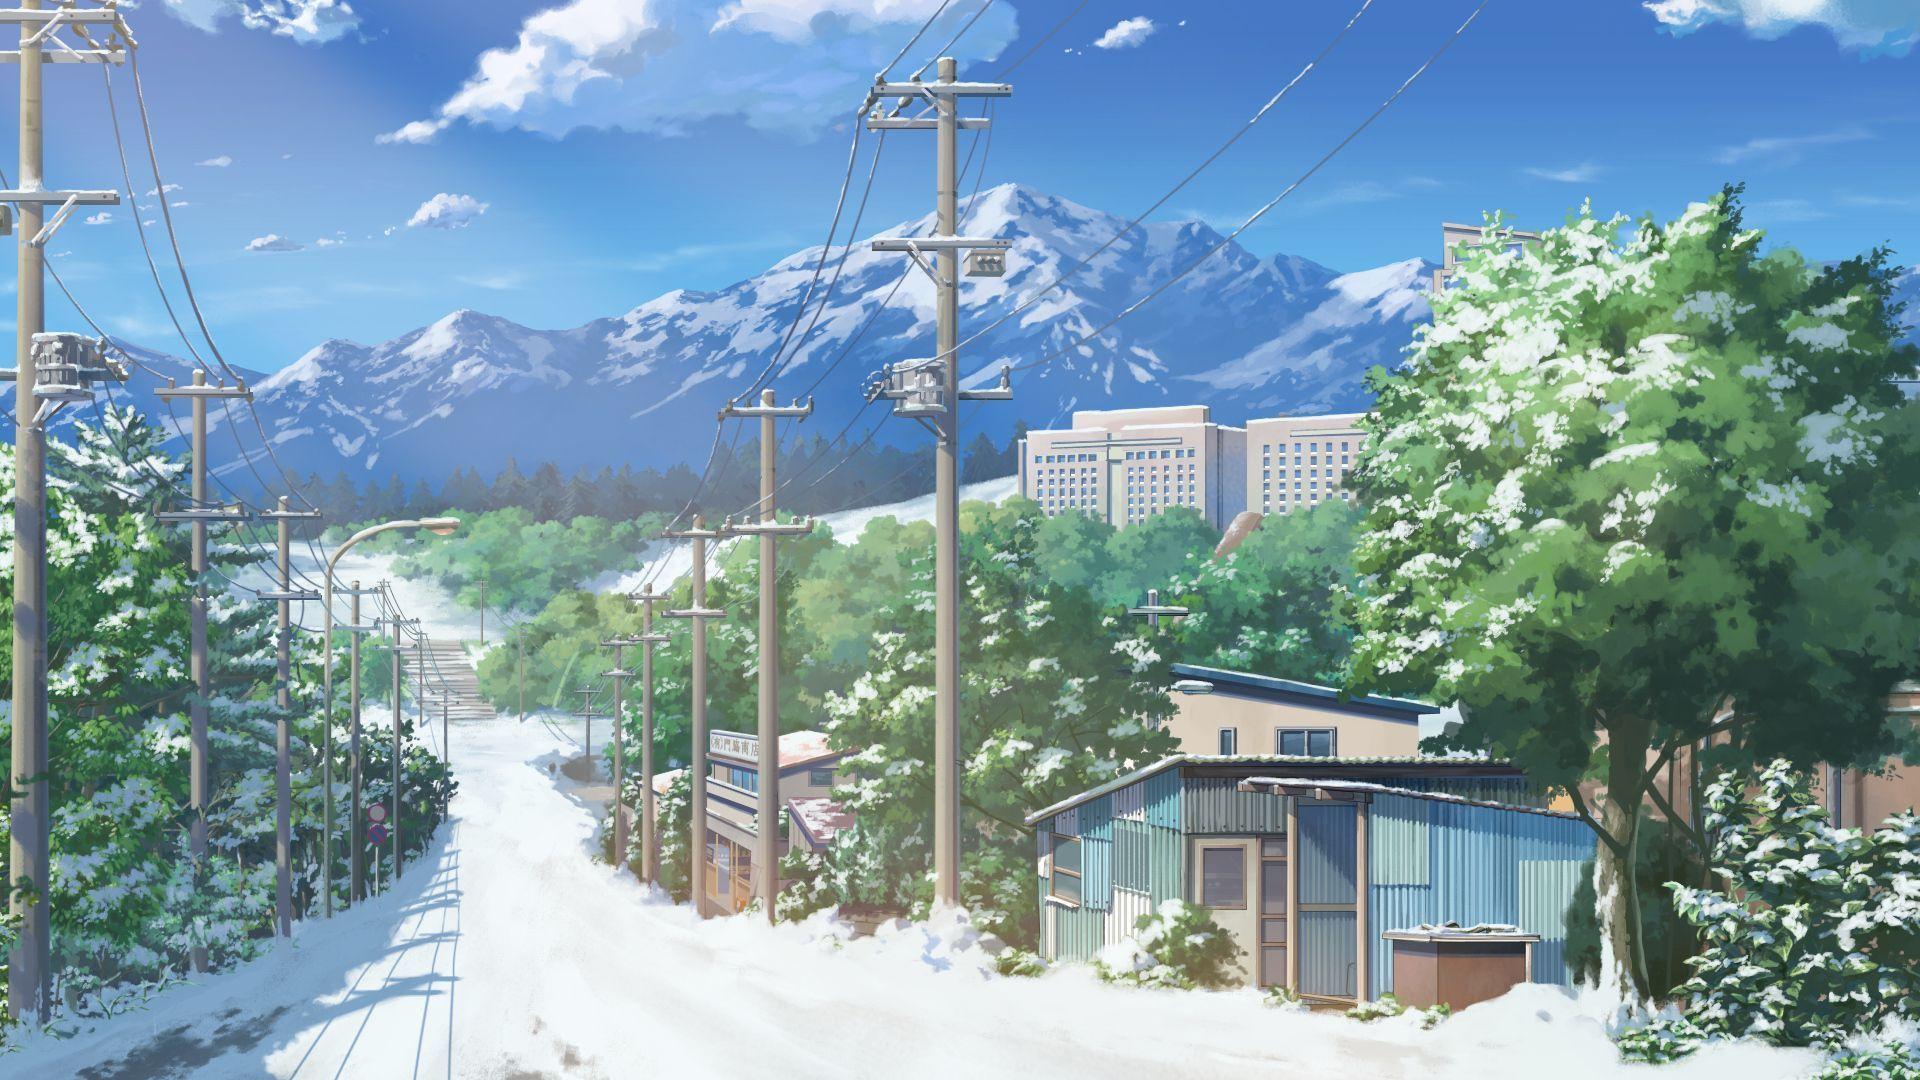 Japanese Anime Scenery Wallpapers.